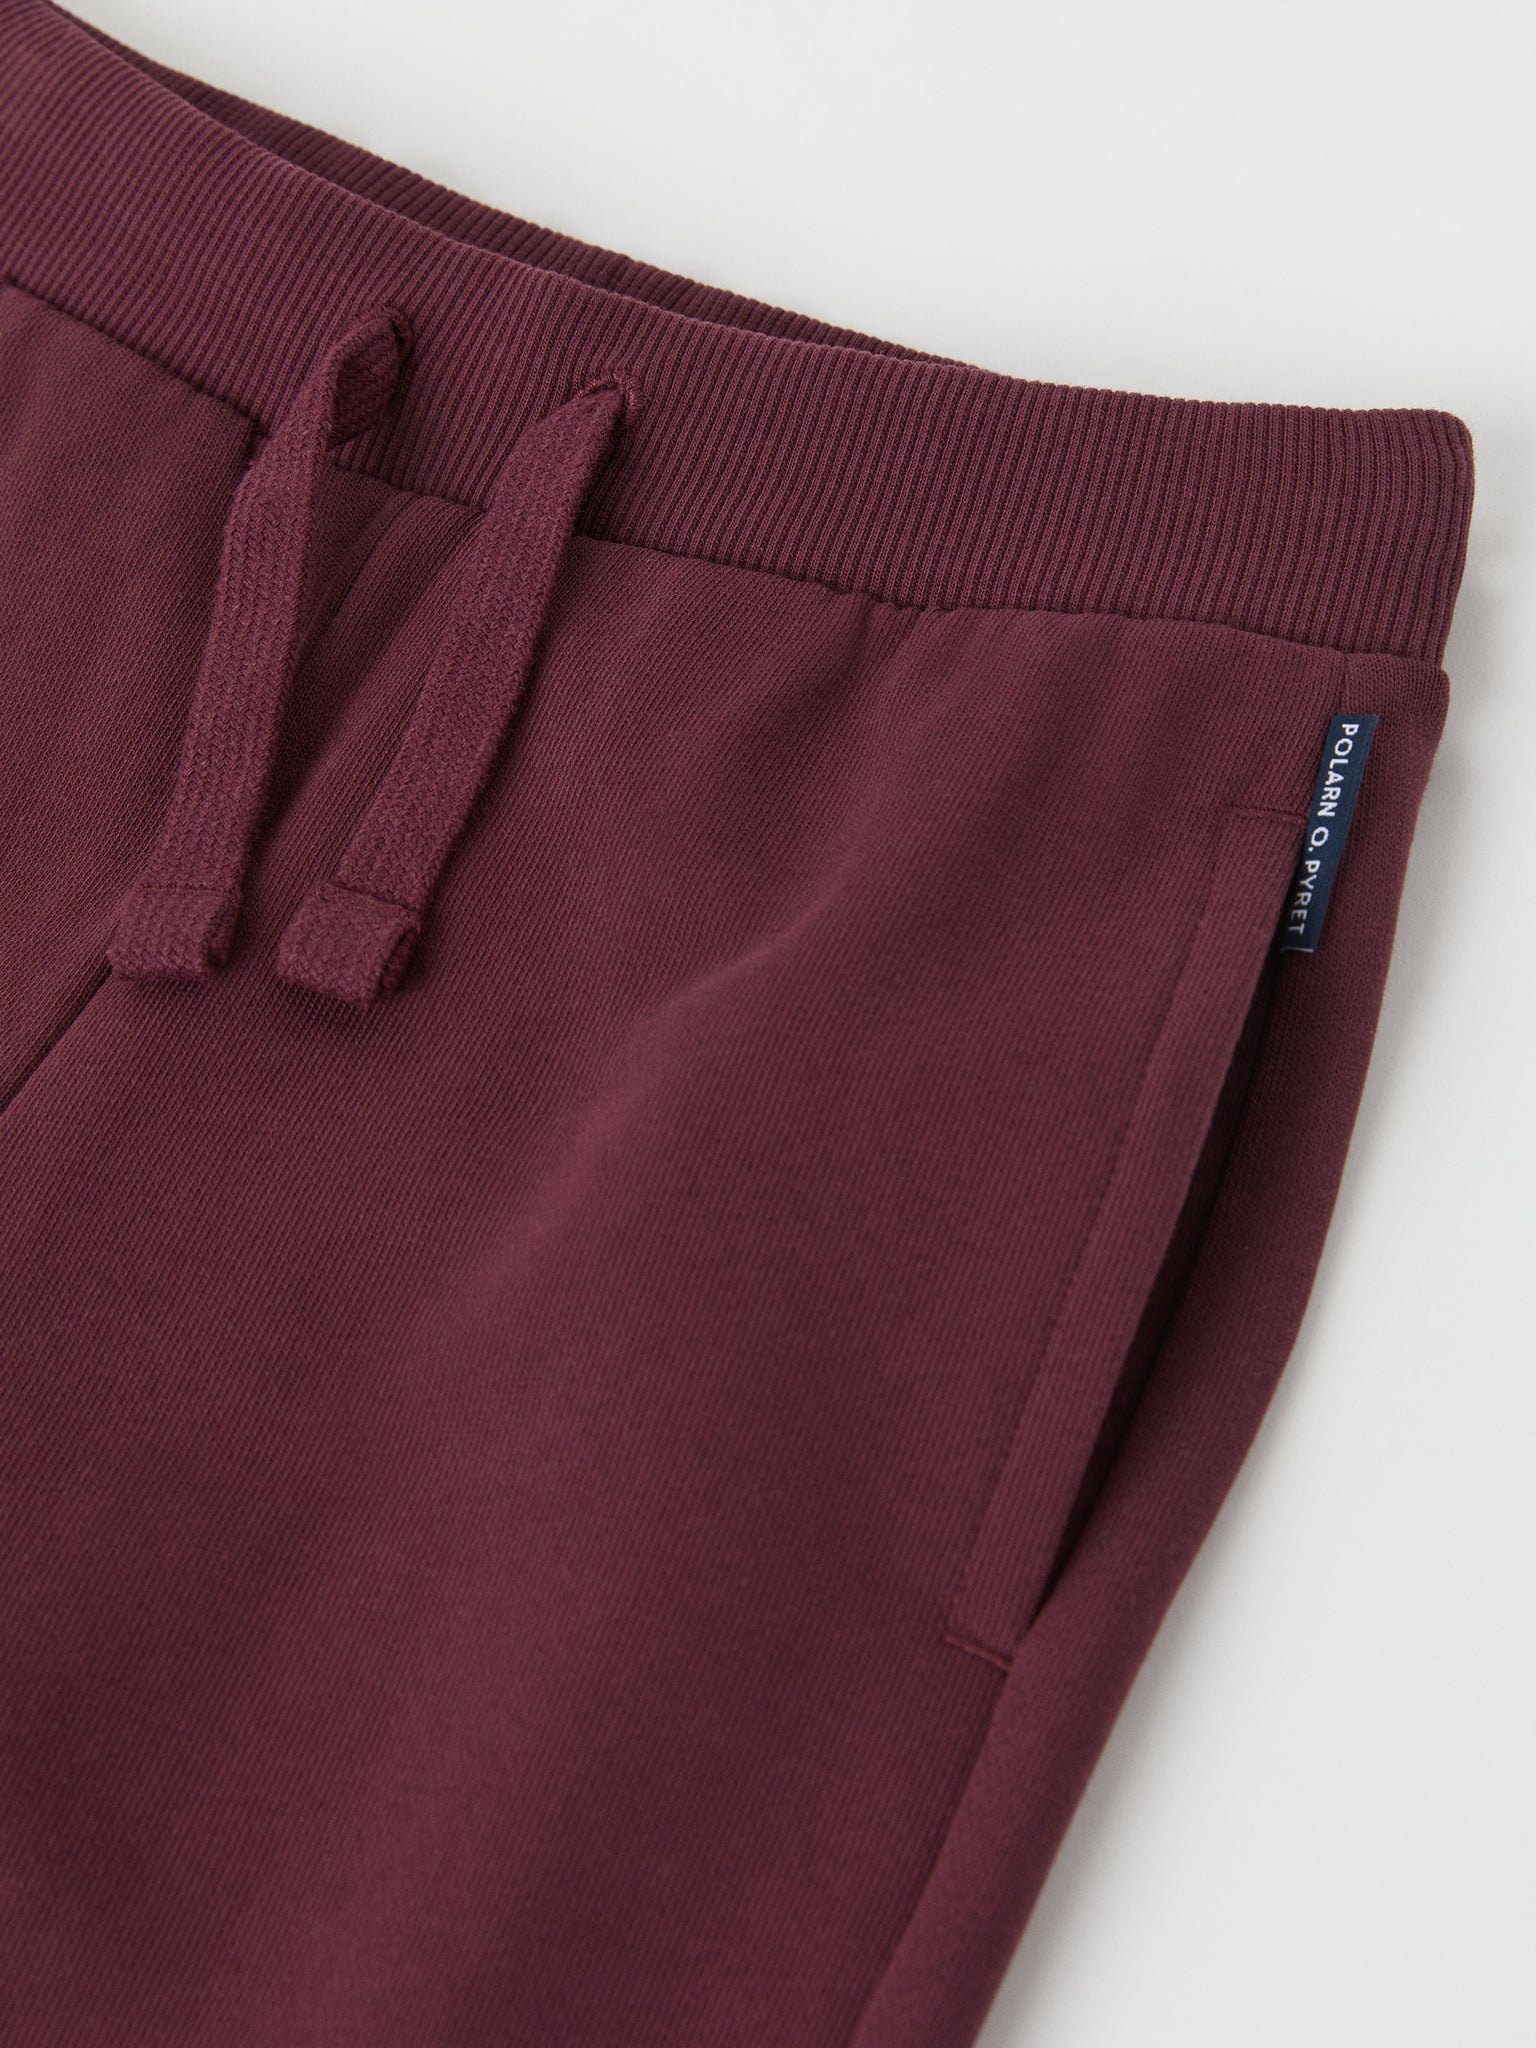 Organic Cotton Burgundy Kids Joggers from the Polarn O. Pyret kidswear collection. Nordic kids clothes made from sustainable sources.